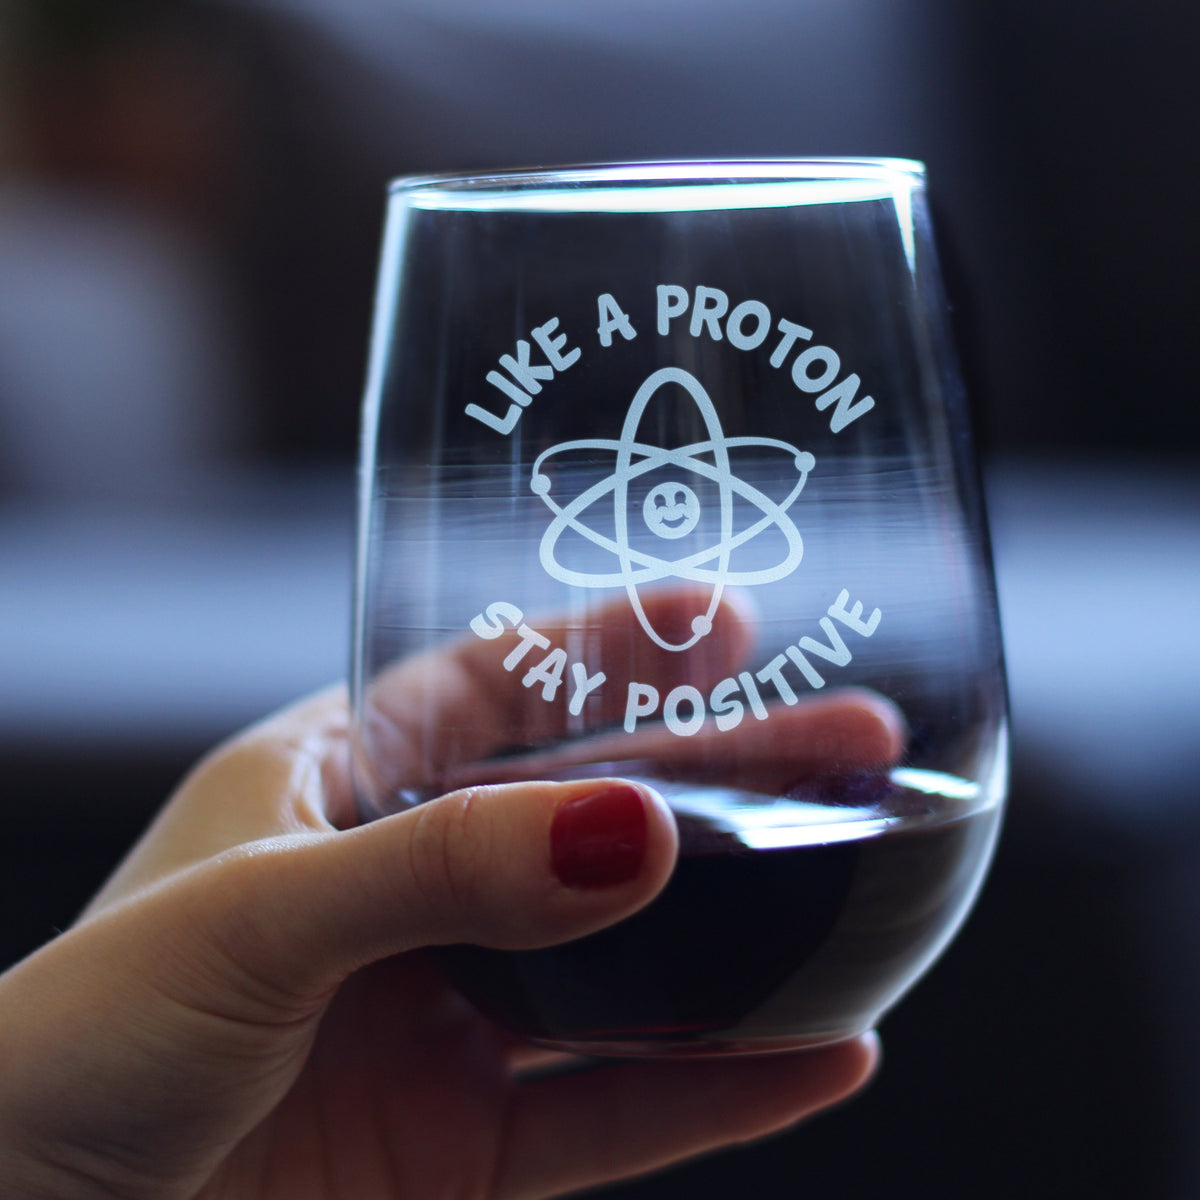 Like A Proton, Stay Positive – Stemless Wine Glass - Funny Science Teacher Gifts for Women &amp; Men - Fun Scientist Decor